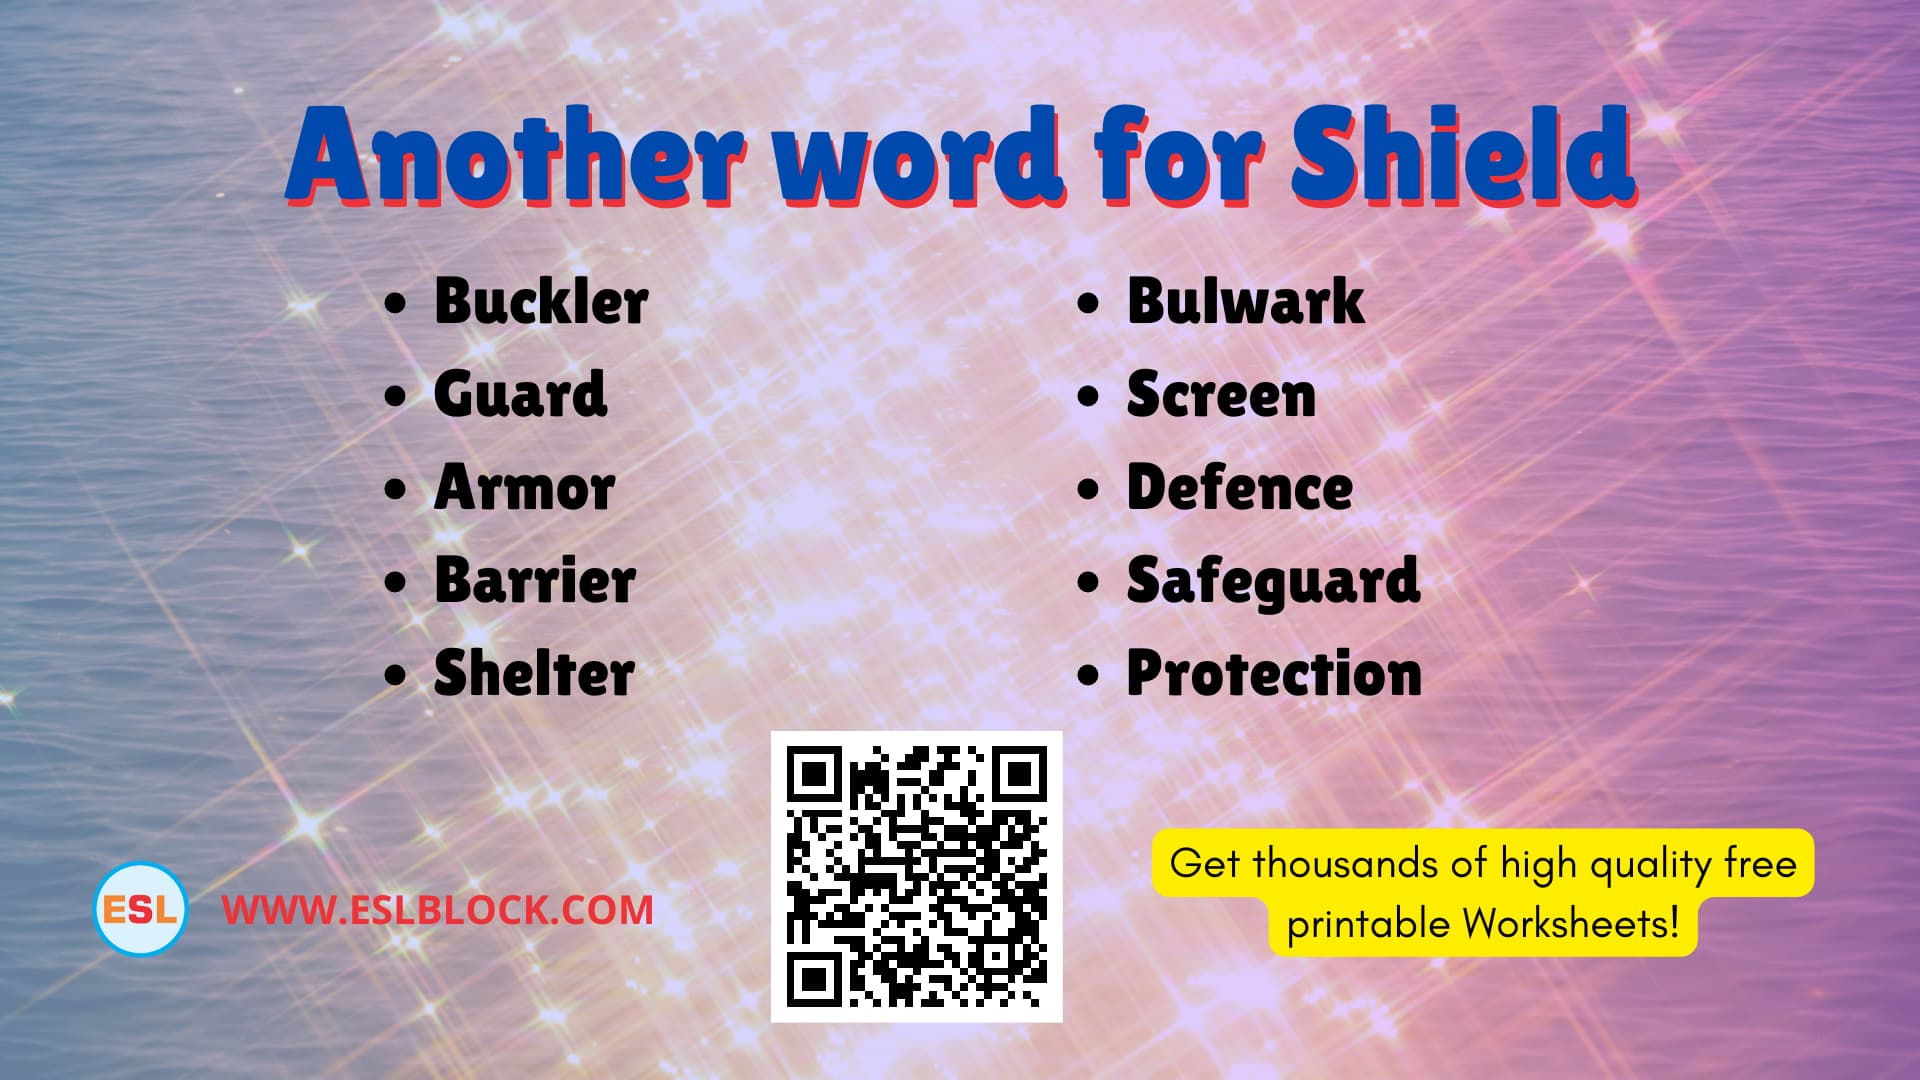 What is another word for Shield